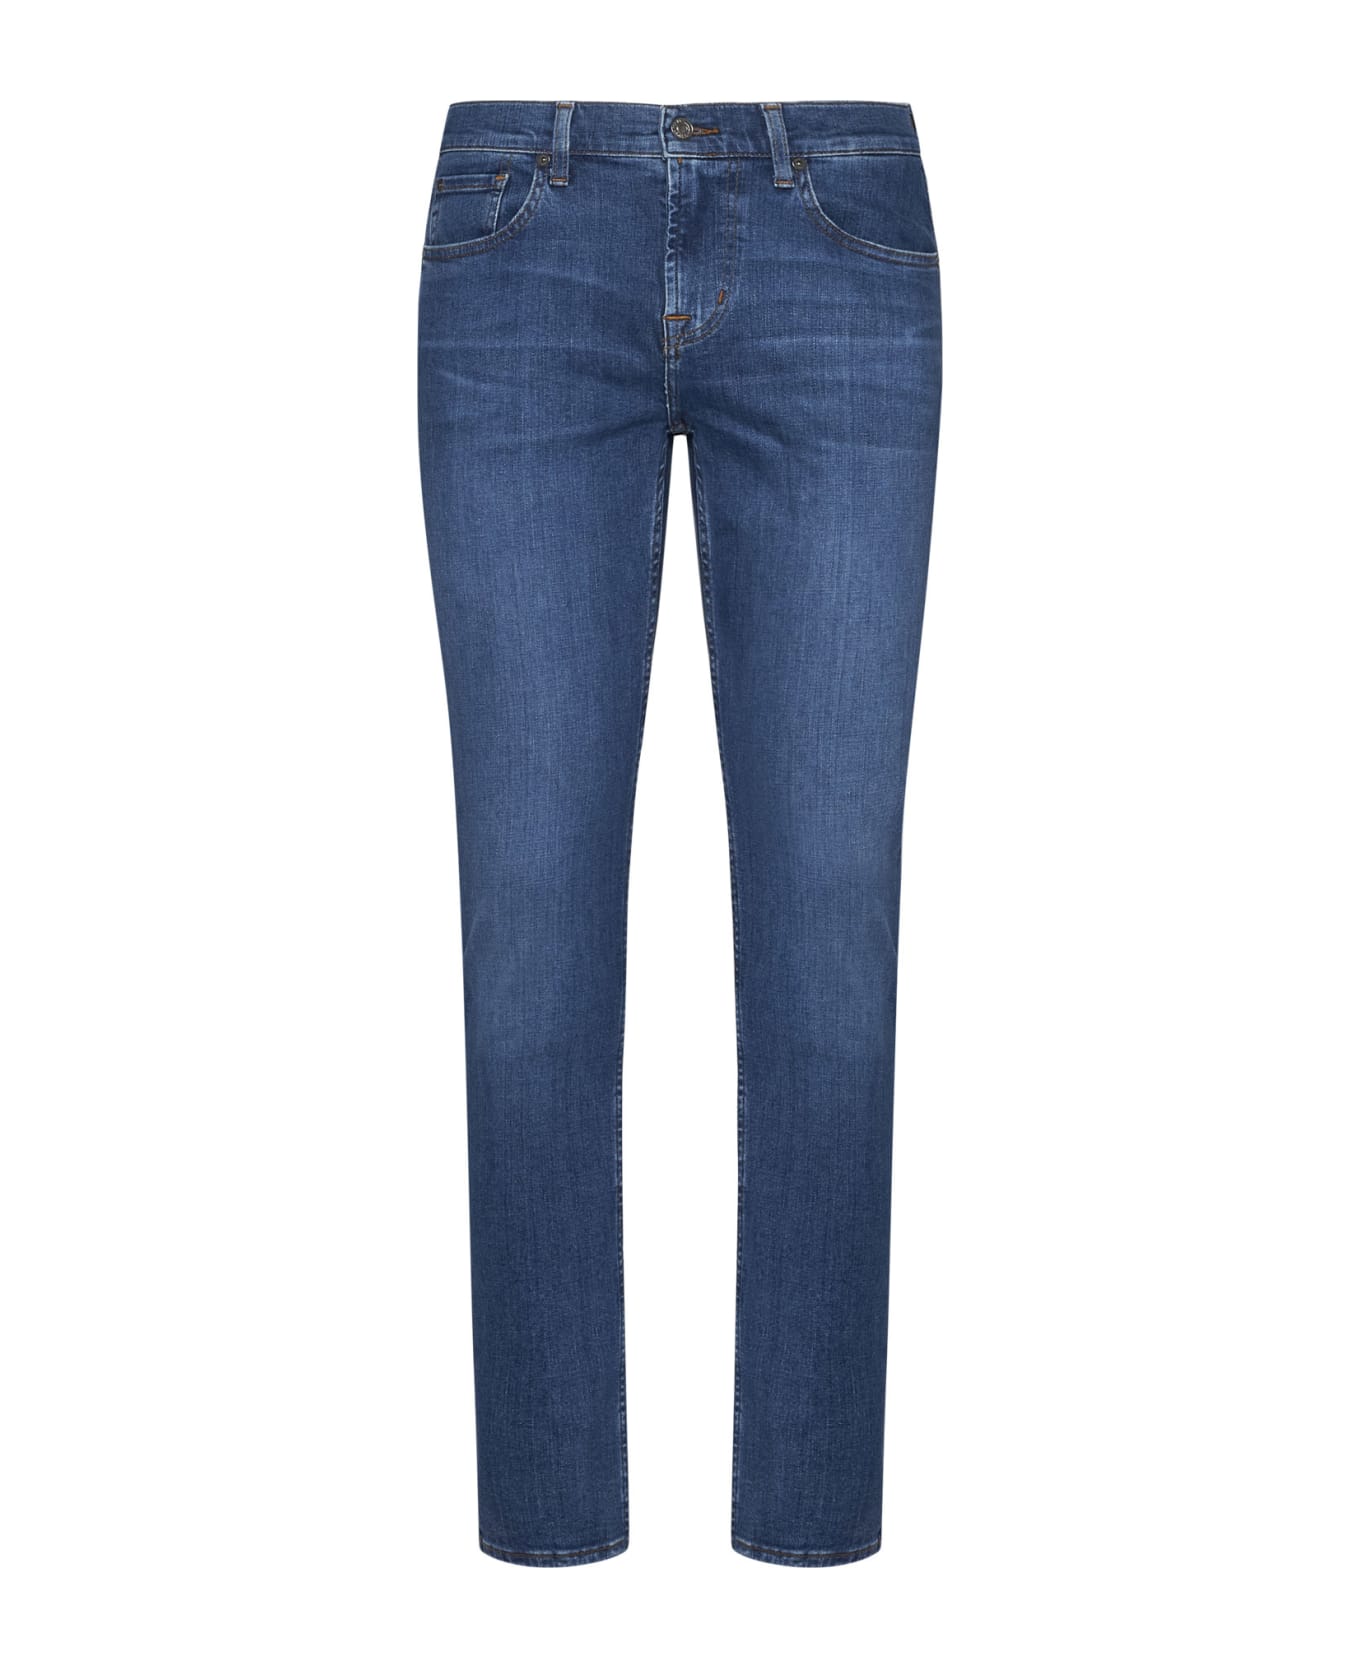 7 For All Mankind Jeans - Mid blue